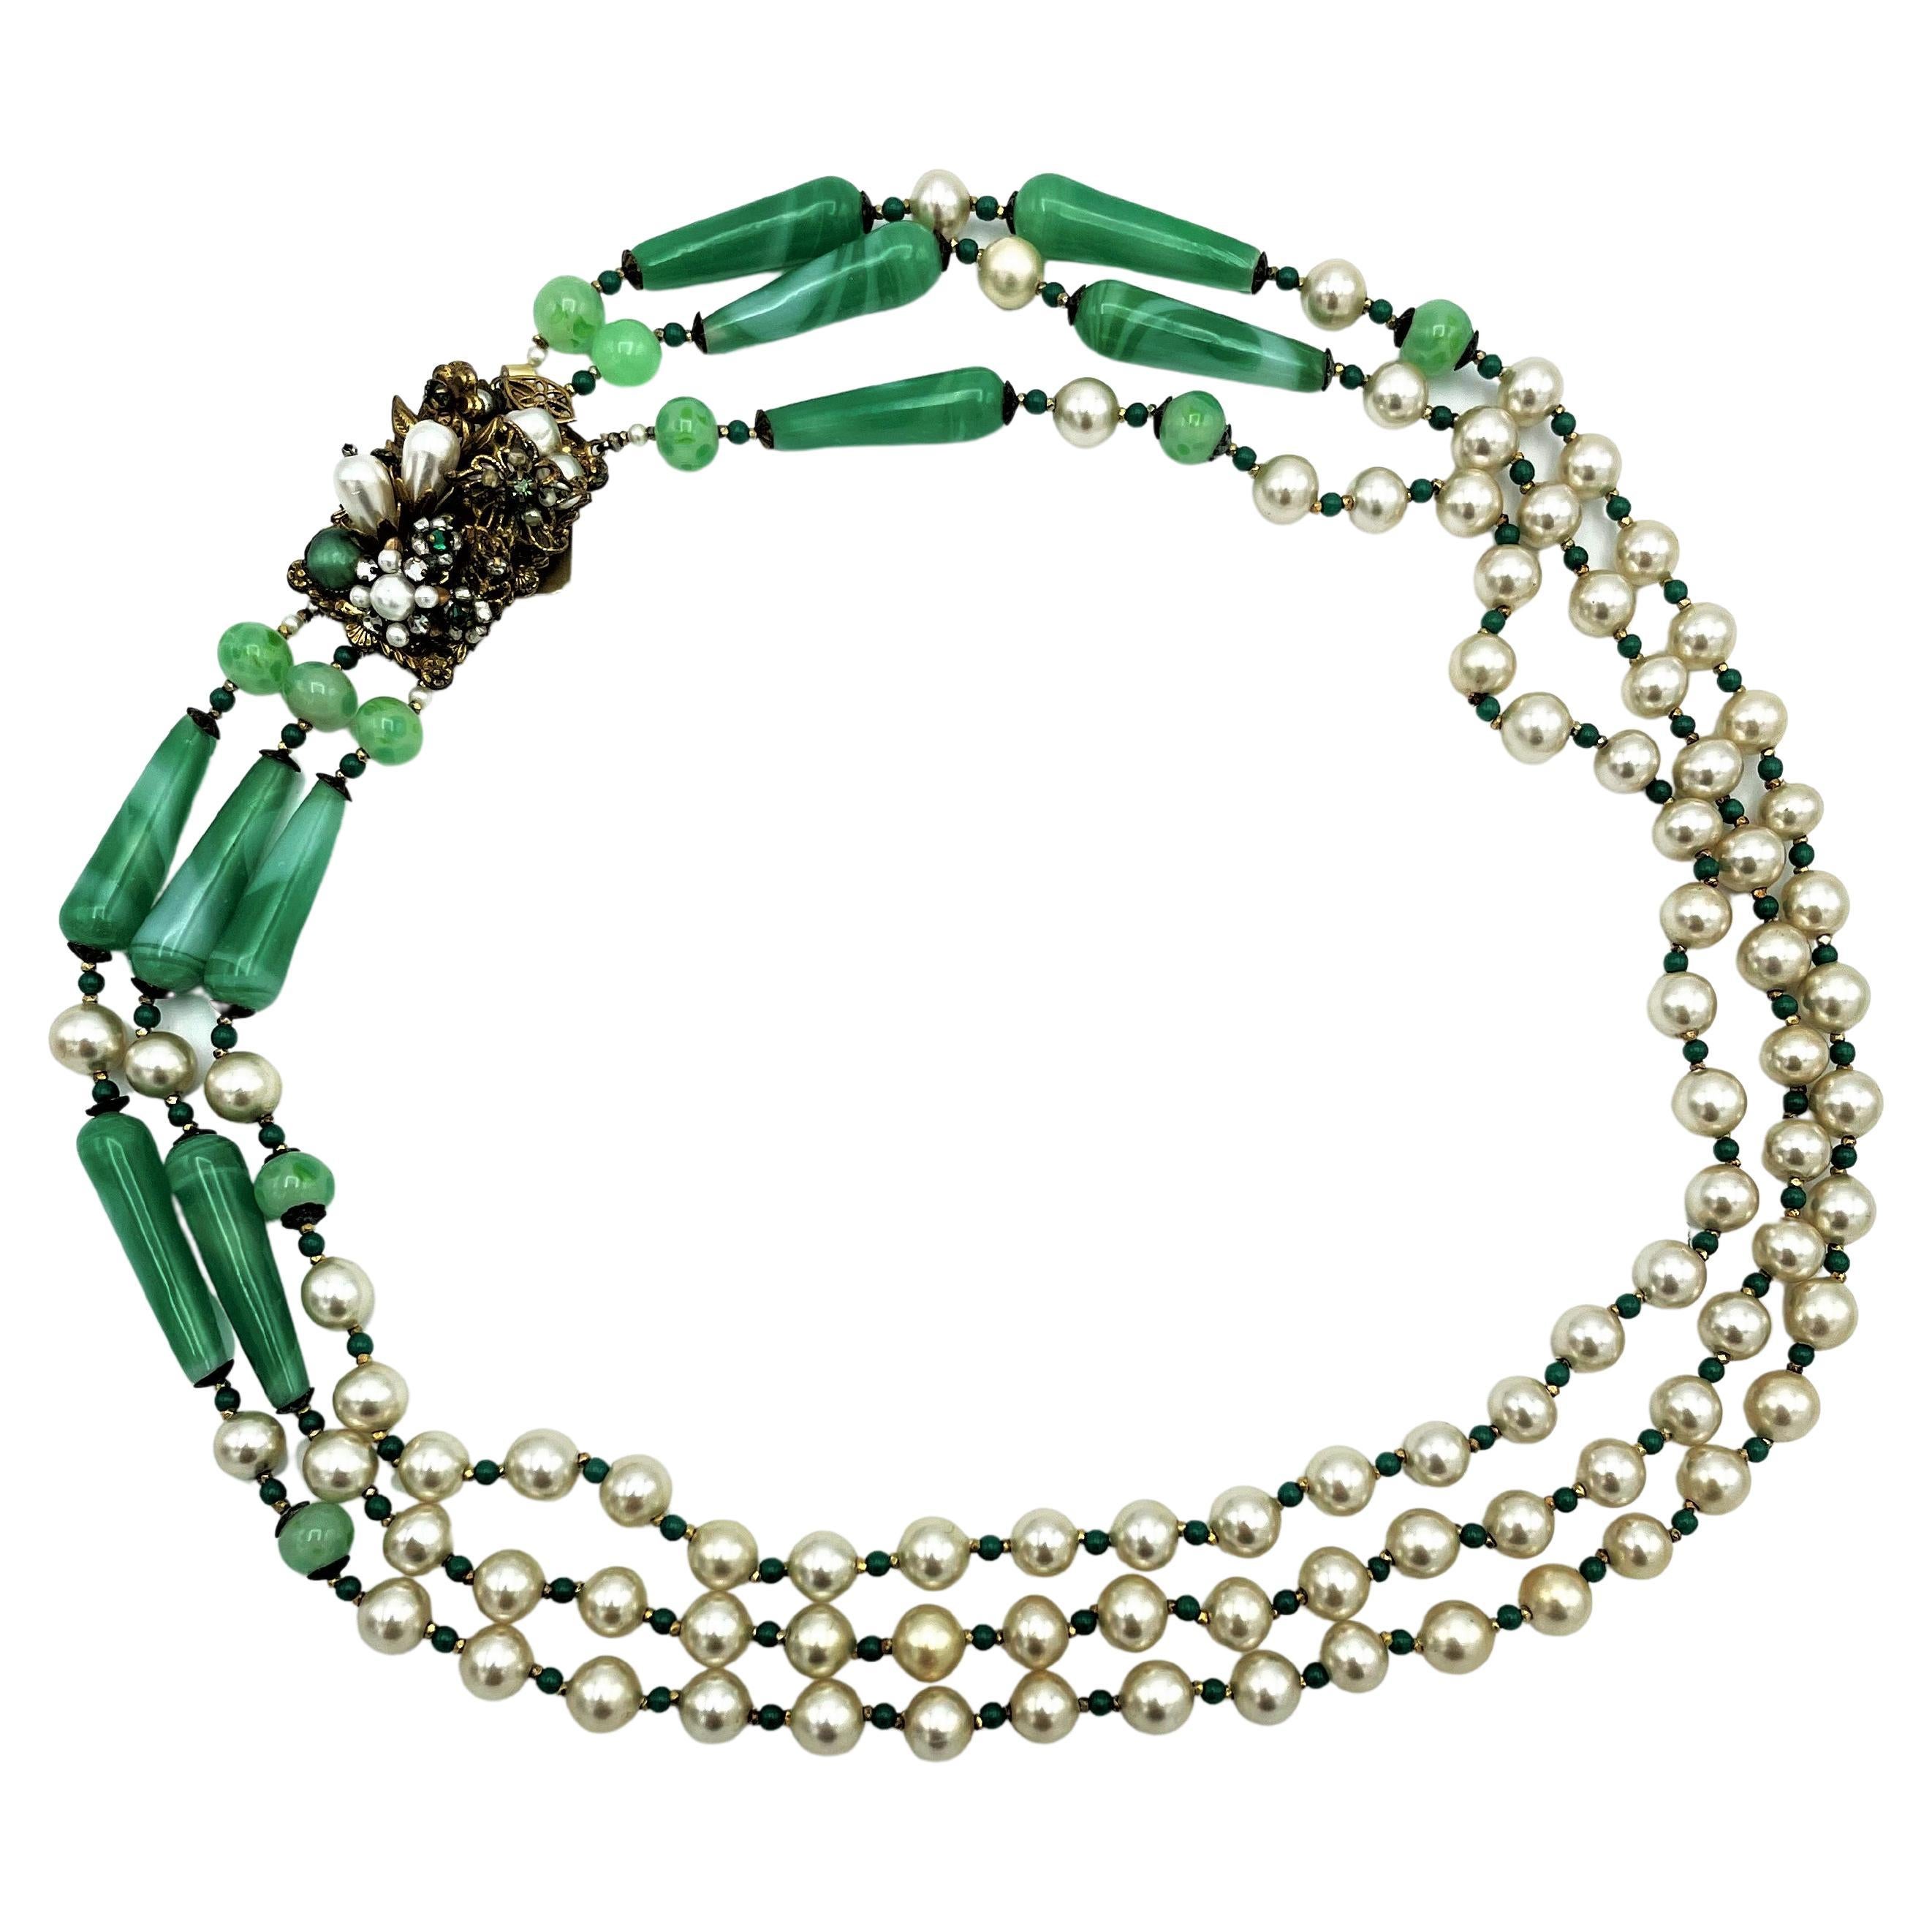 Vintage 3 row necklace by Robert with faux jade and faux pearls USA 1940s 